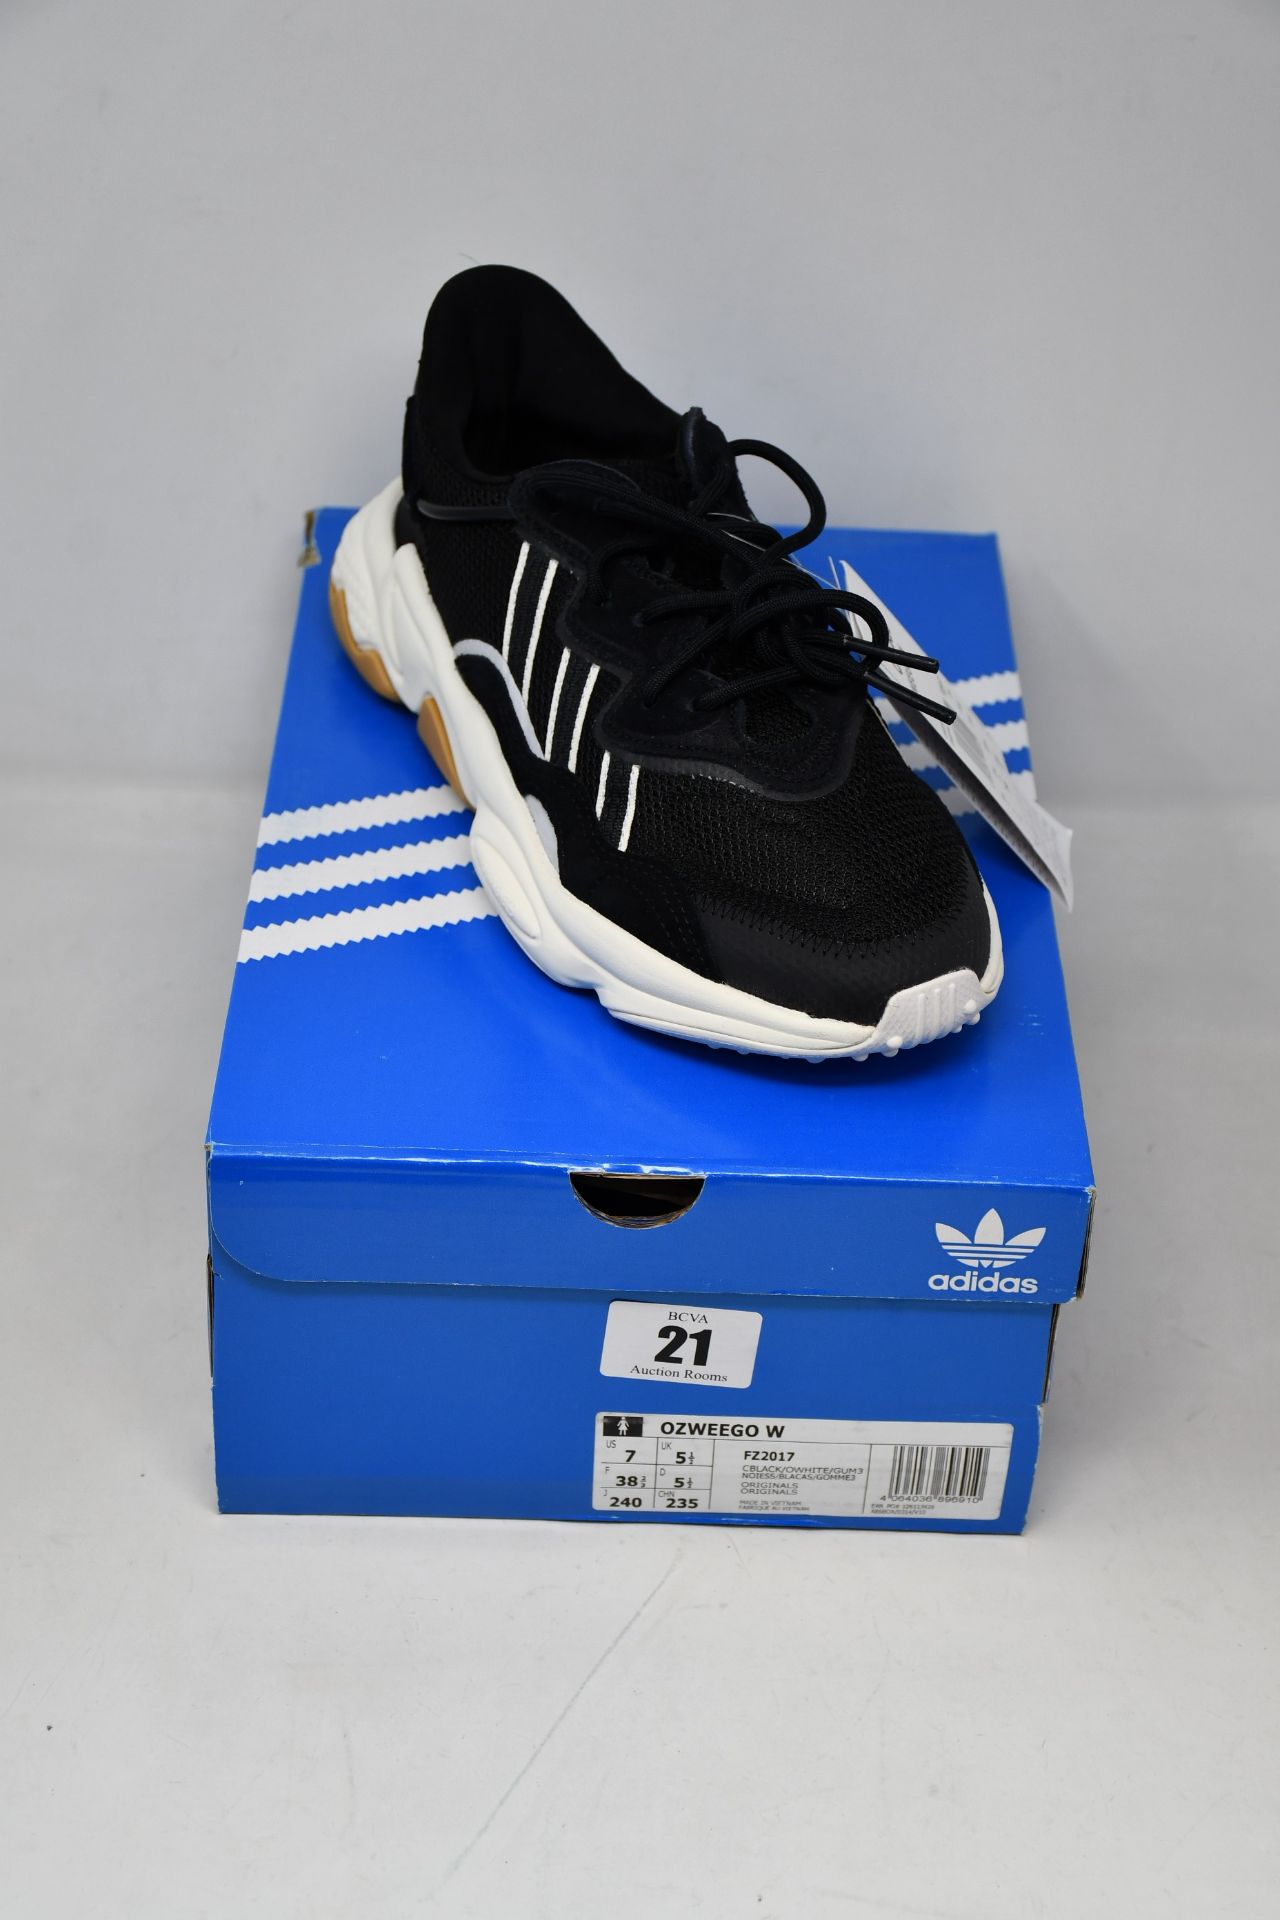 A pair of women's as new Adidas Ozweego trainers (UK 5.5).